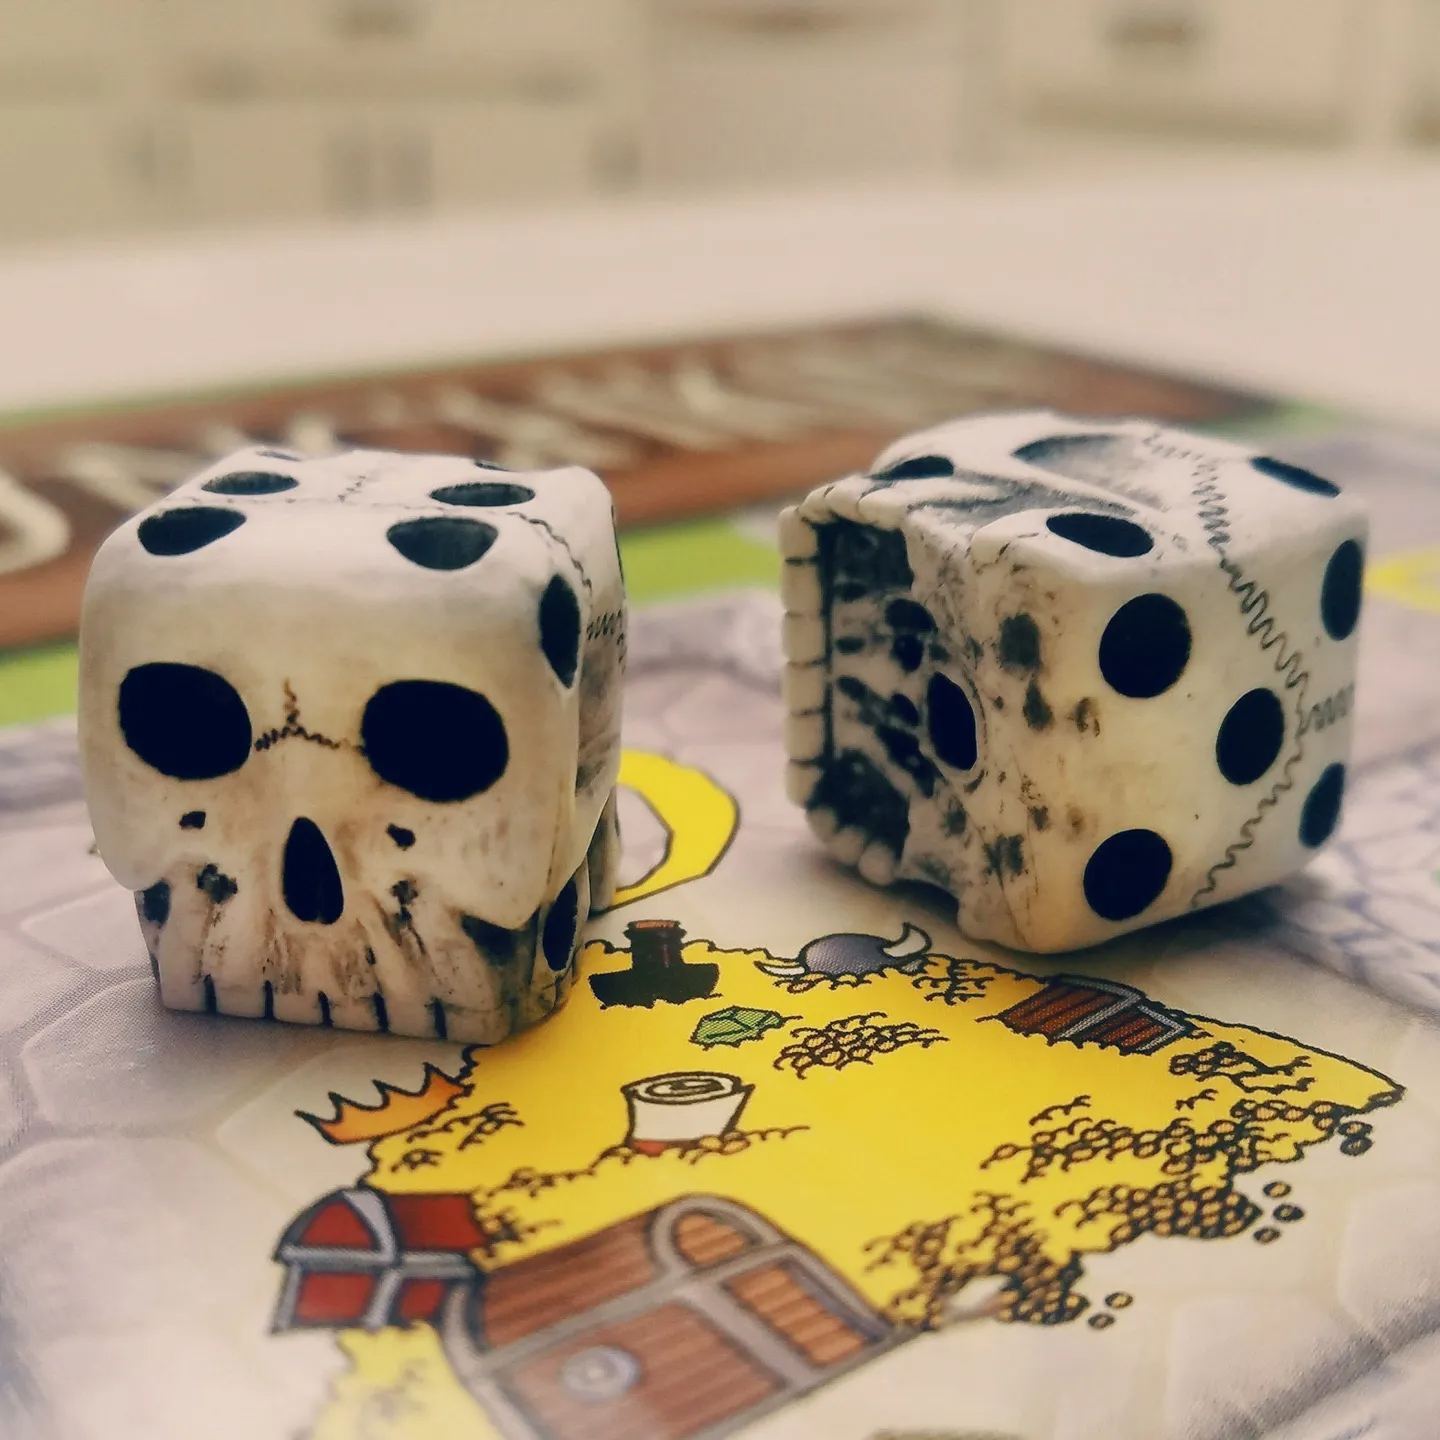 🎲White Skull Dice for Casual Parties and Board Games🦴